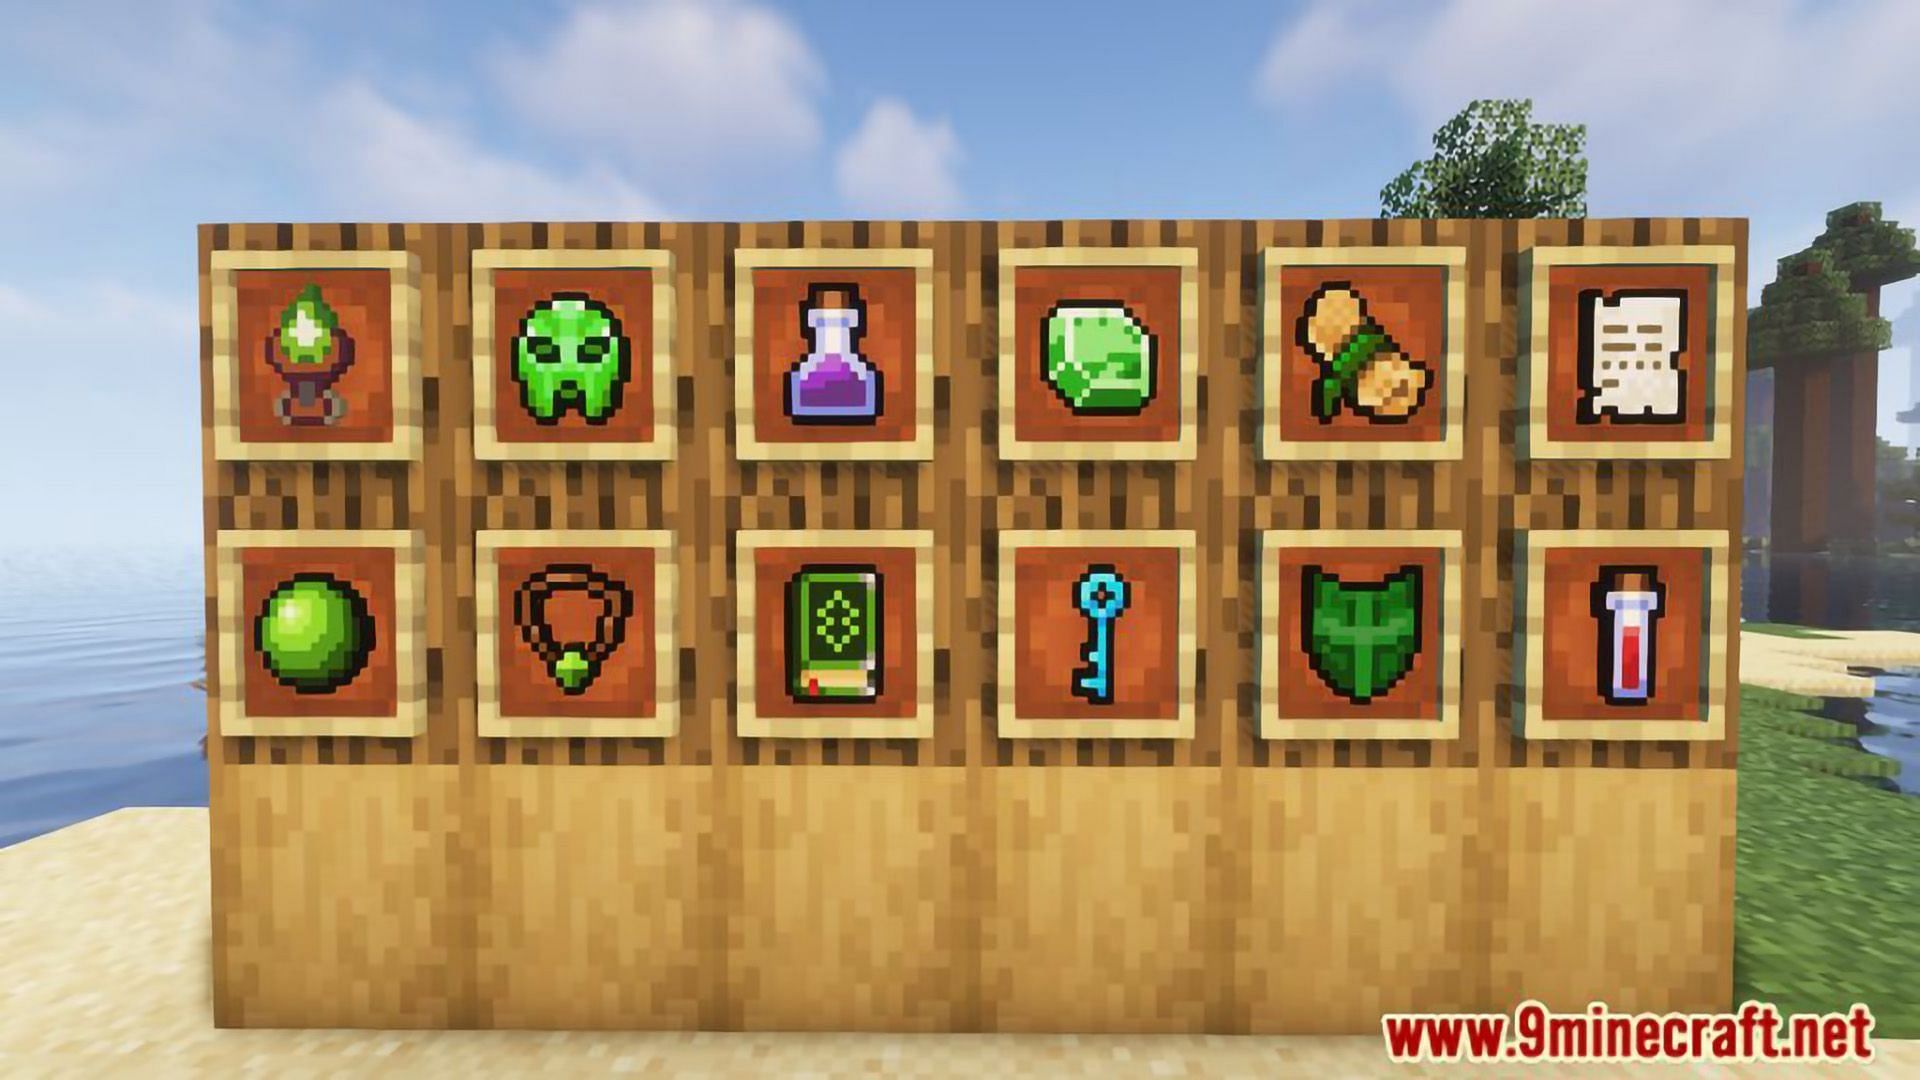 These items have magical abilities (Image via 9minecraft.net)